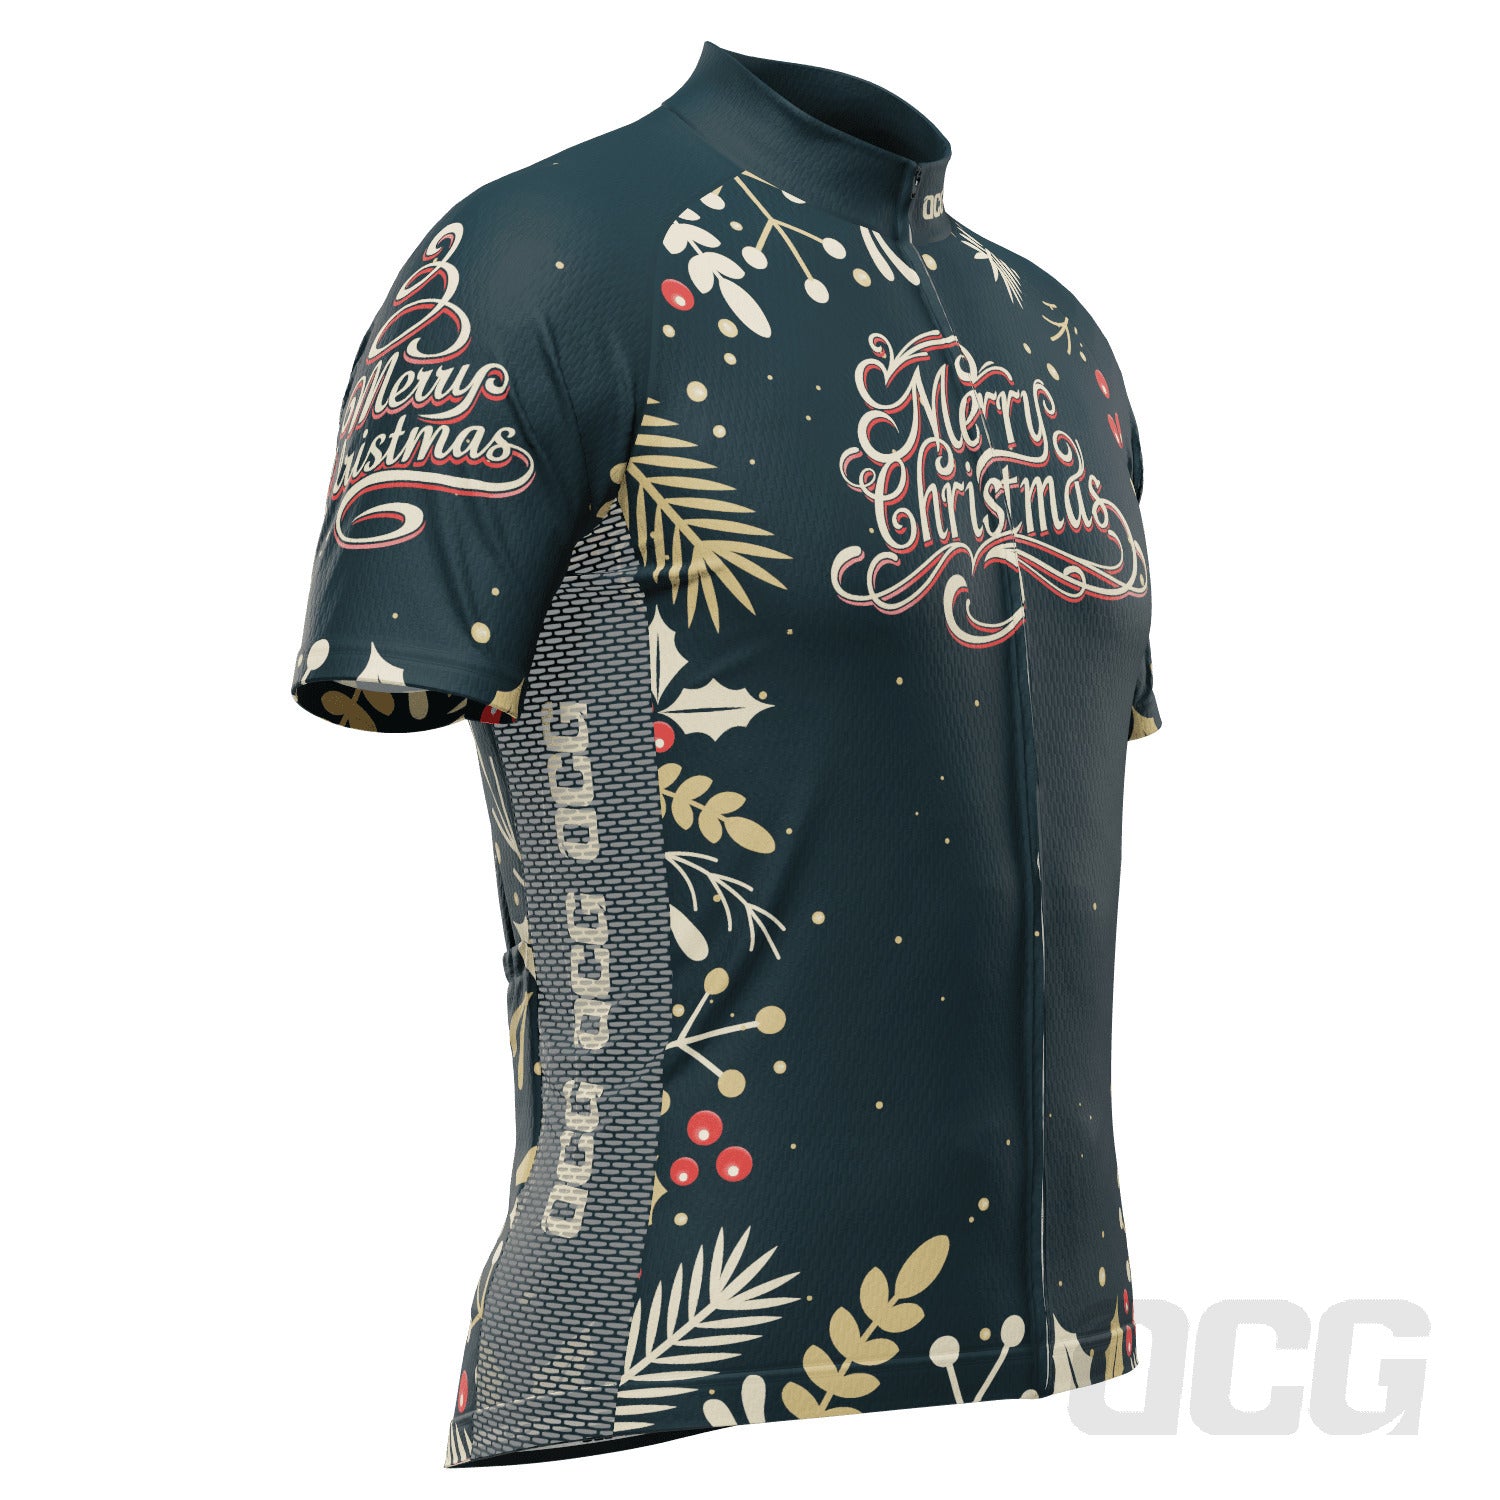 Men's Christmas Holly Short Sleeve Cycling Jersey